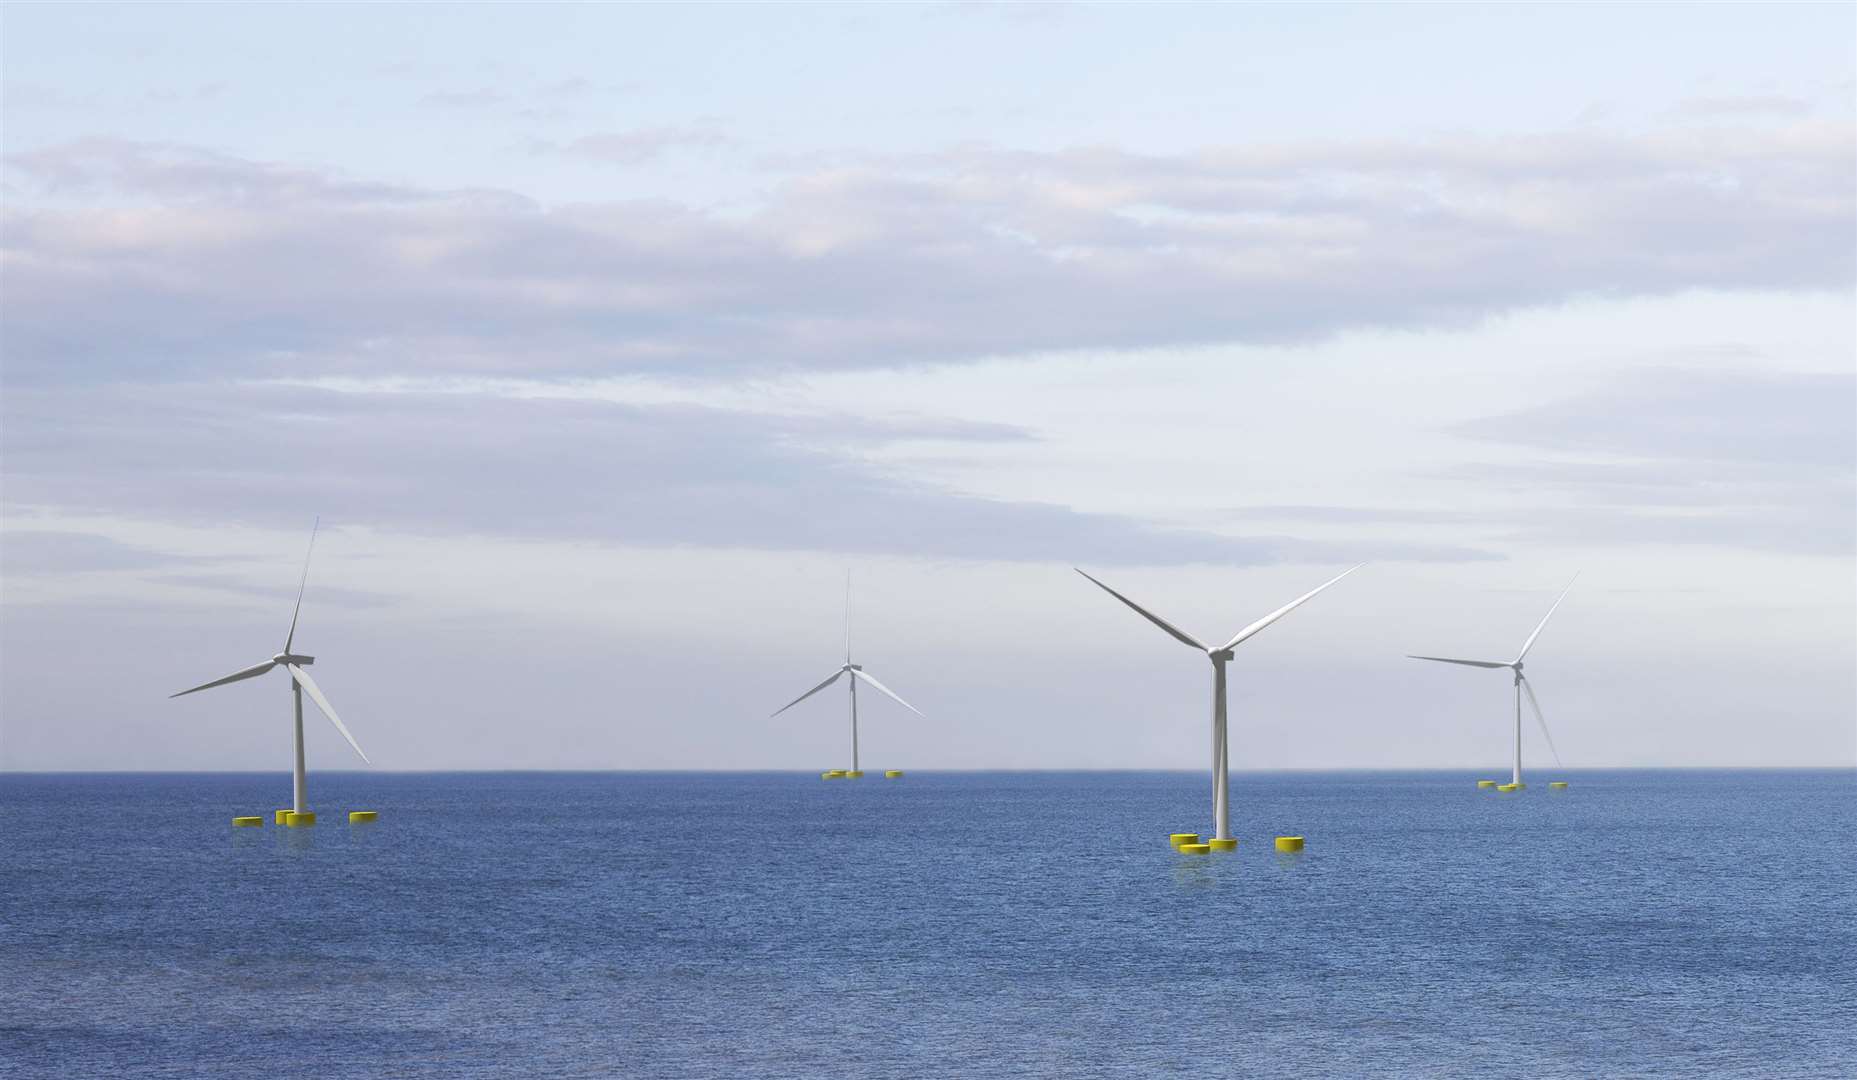 Pentland Demo will support the development of innovative, UK-manufactured floating wind technologies.